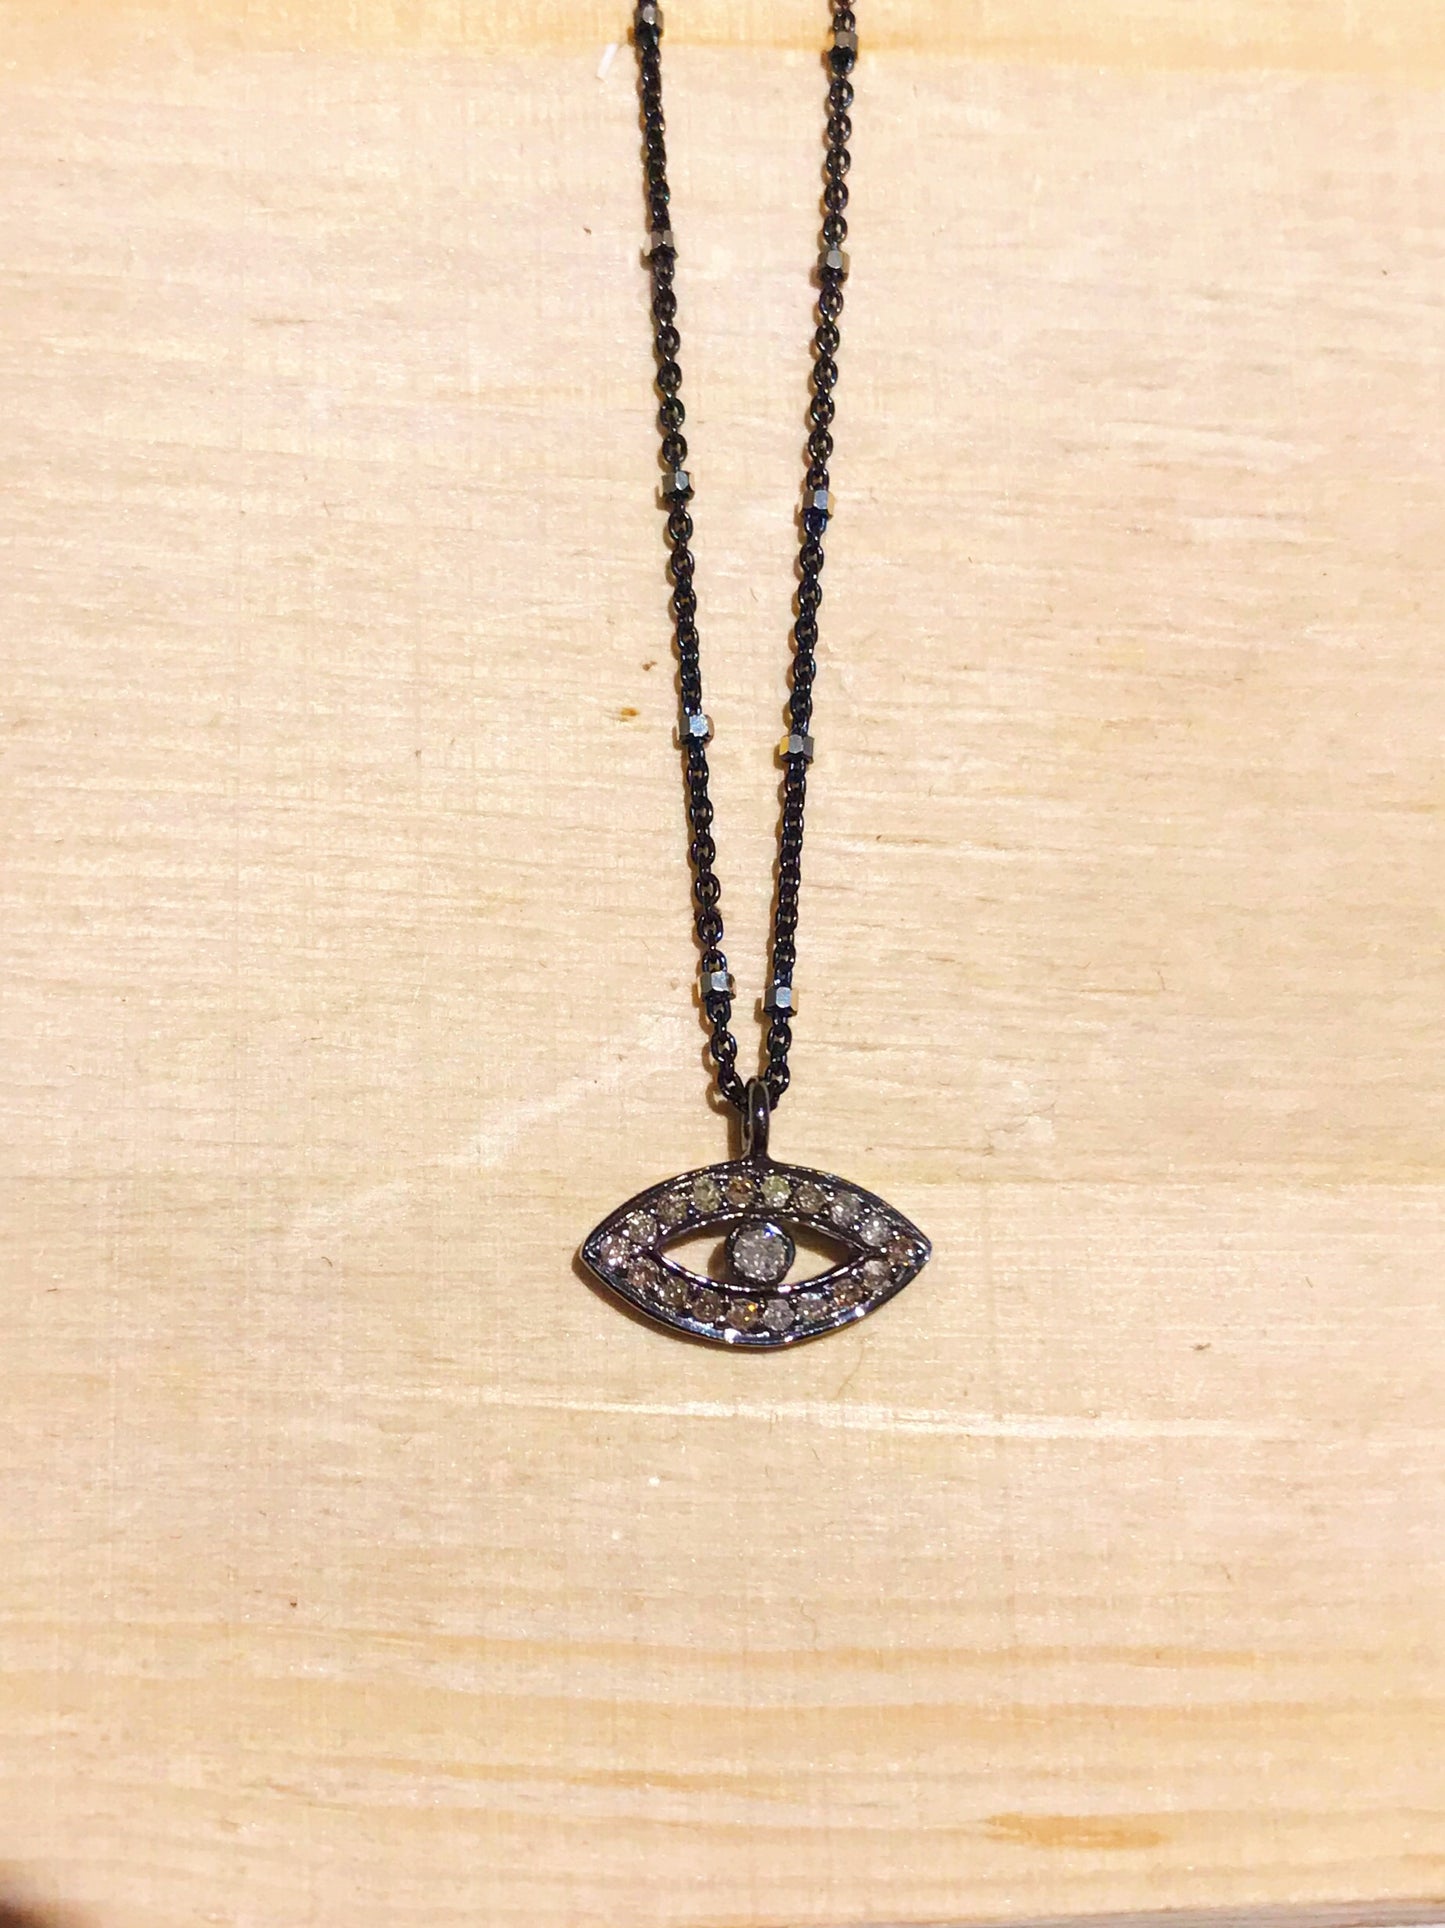 The Third Eye - Pave Diamond Necklace in Silver